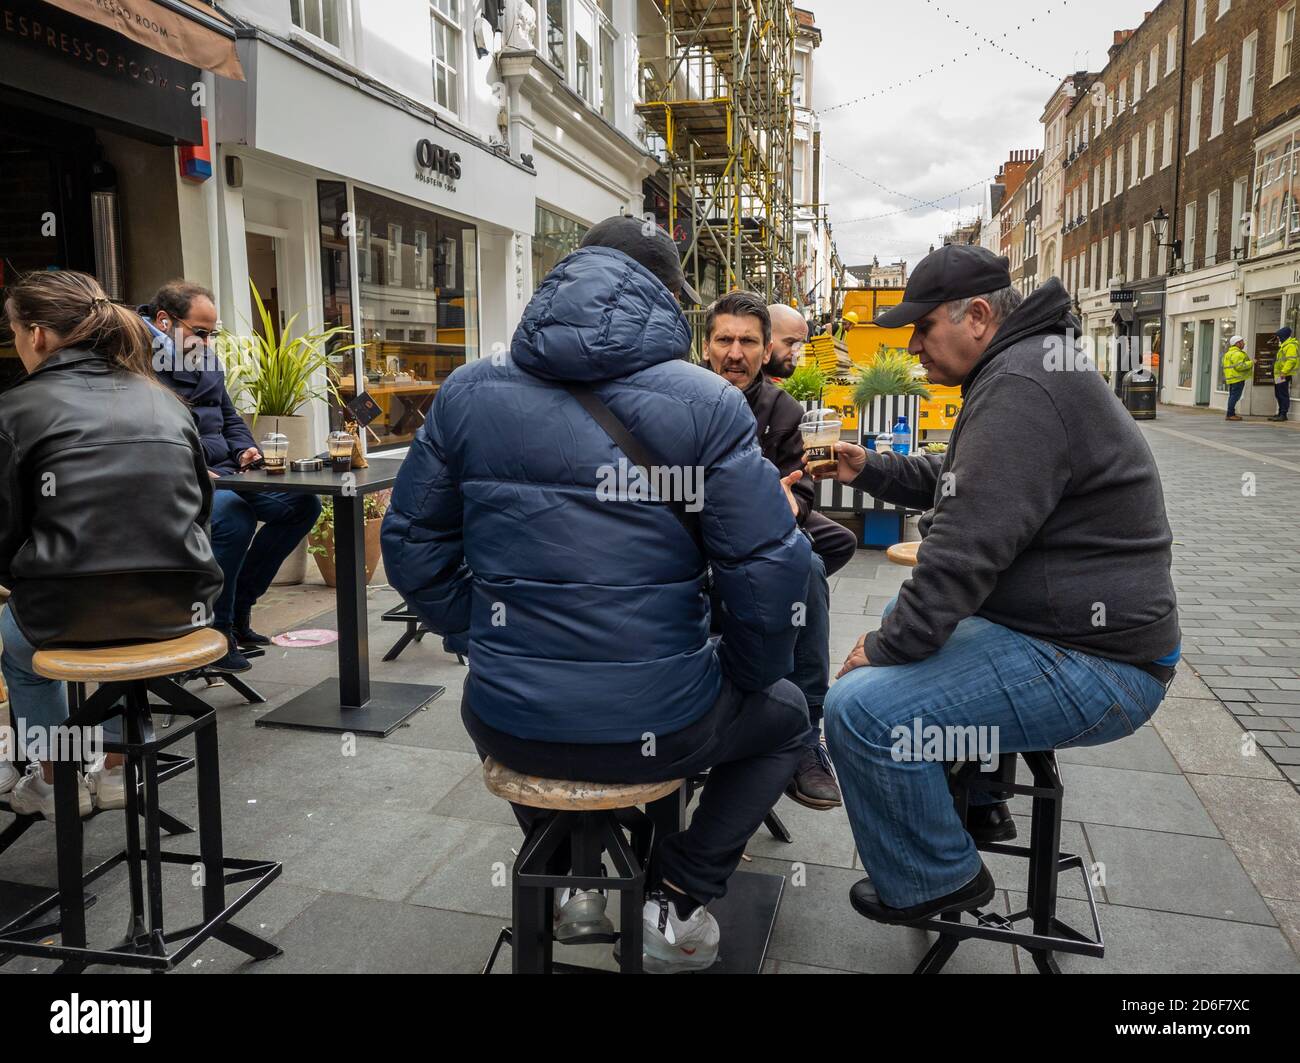 People enjoying coffee and chatting outside a cafe. Stock Photo